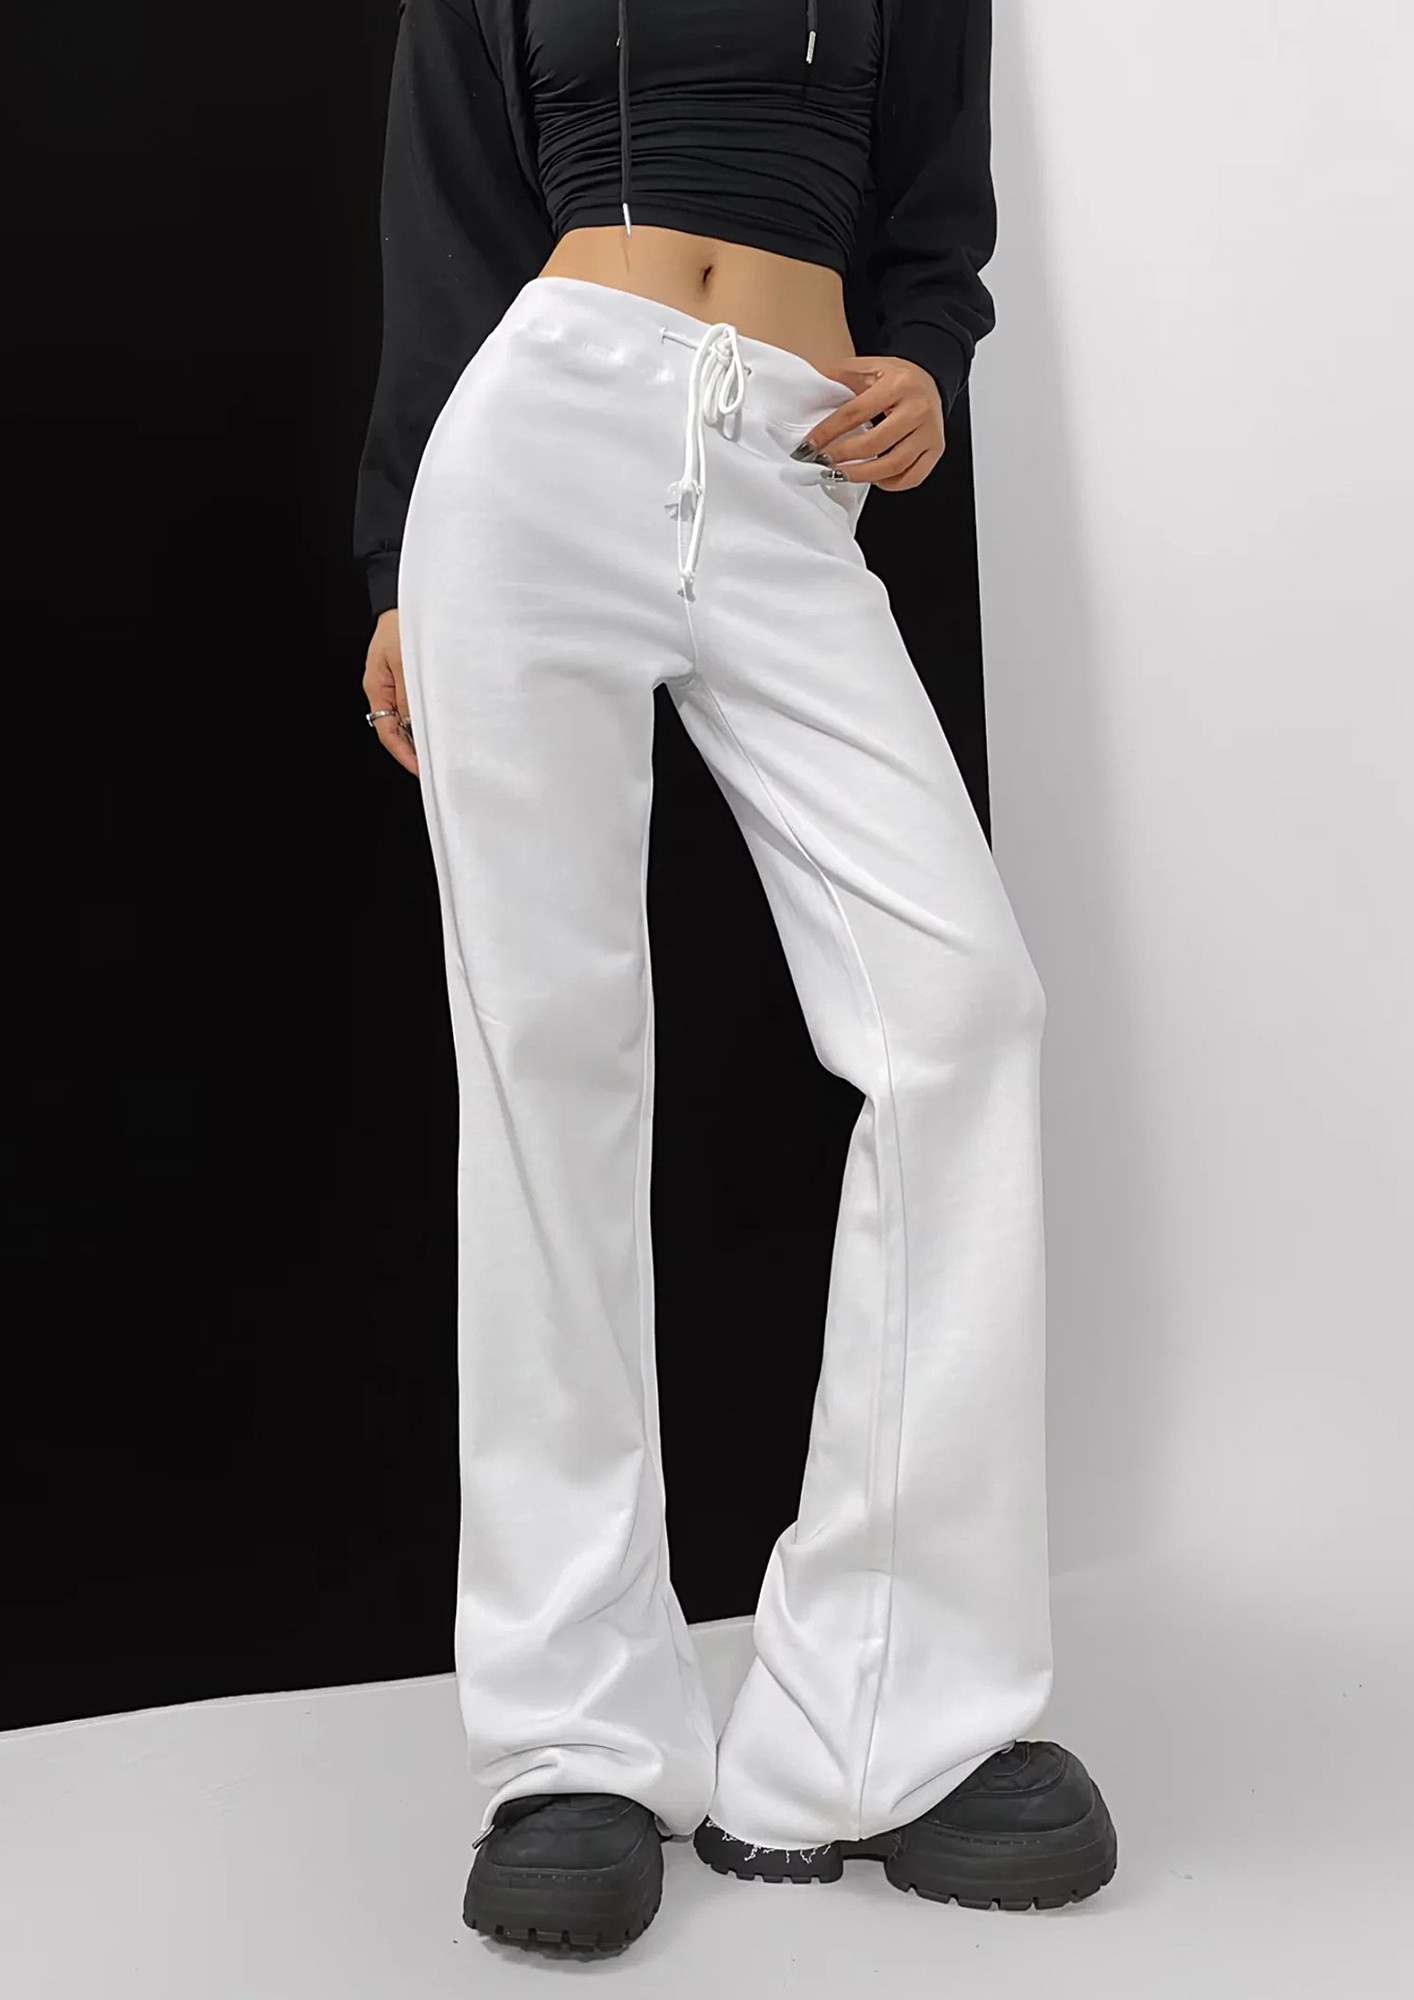 Women's White Flare Jeans with Pull-on Design | SPANX